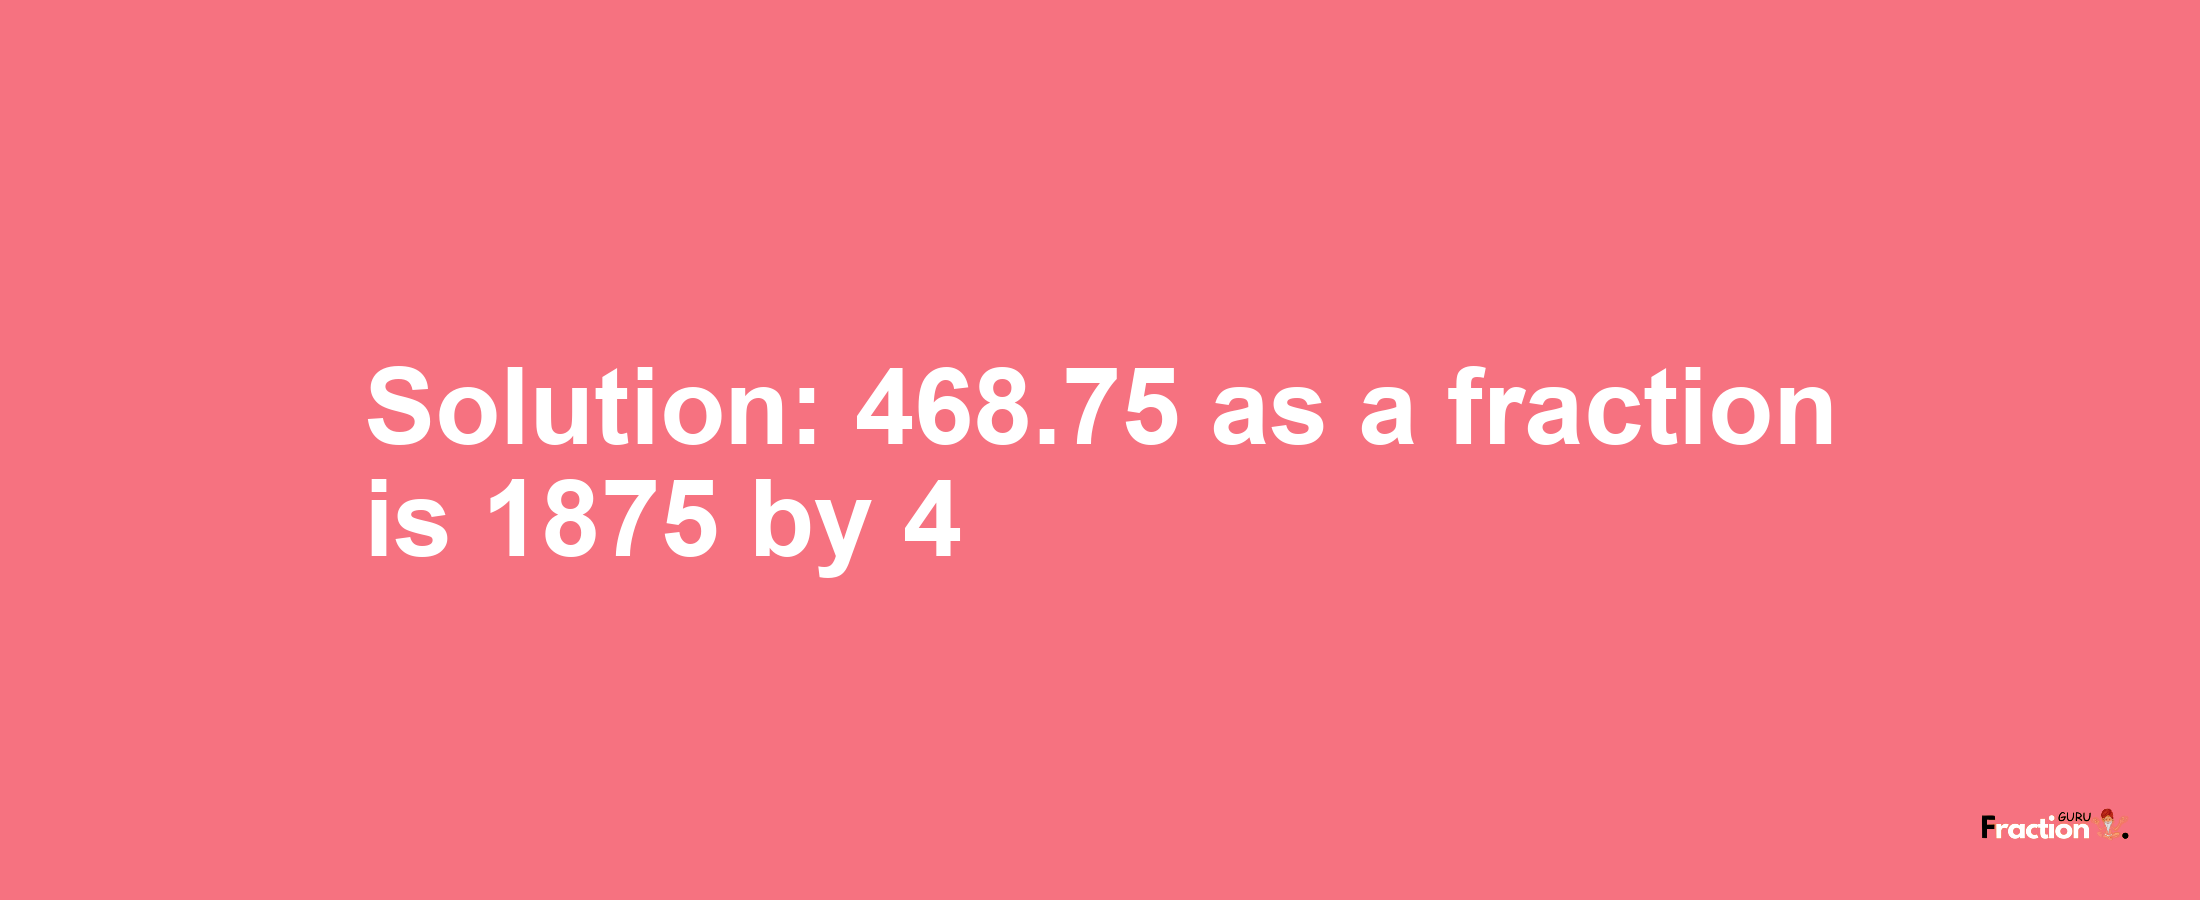 Solution:468.75 as a fraction is 1875/4